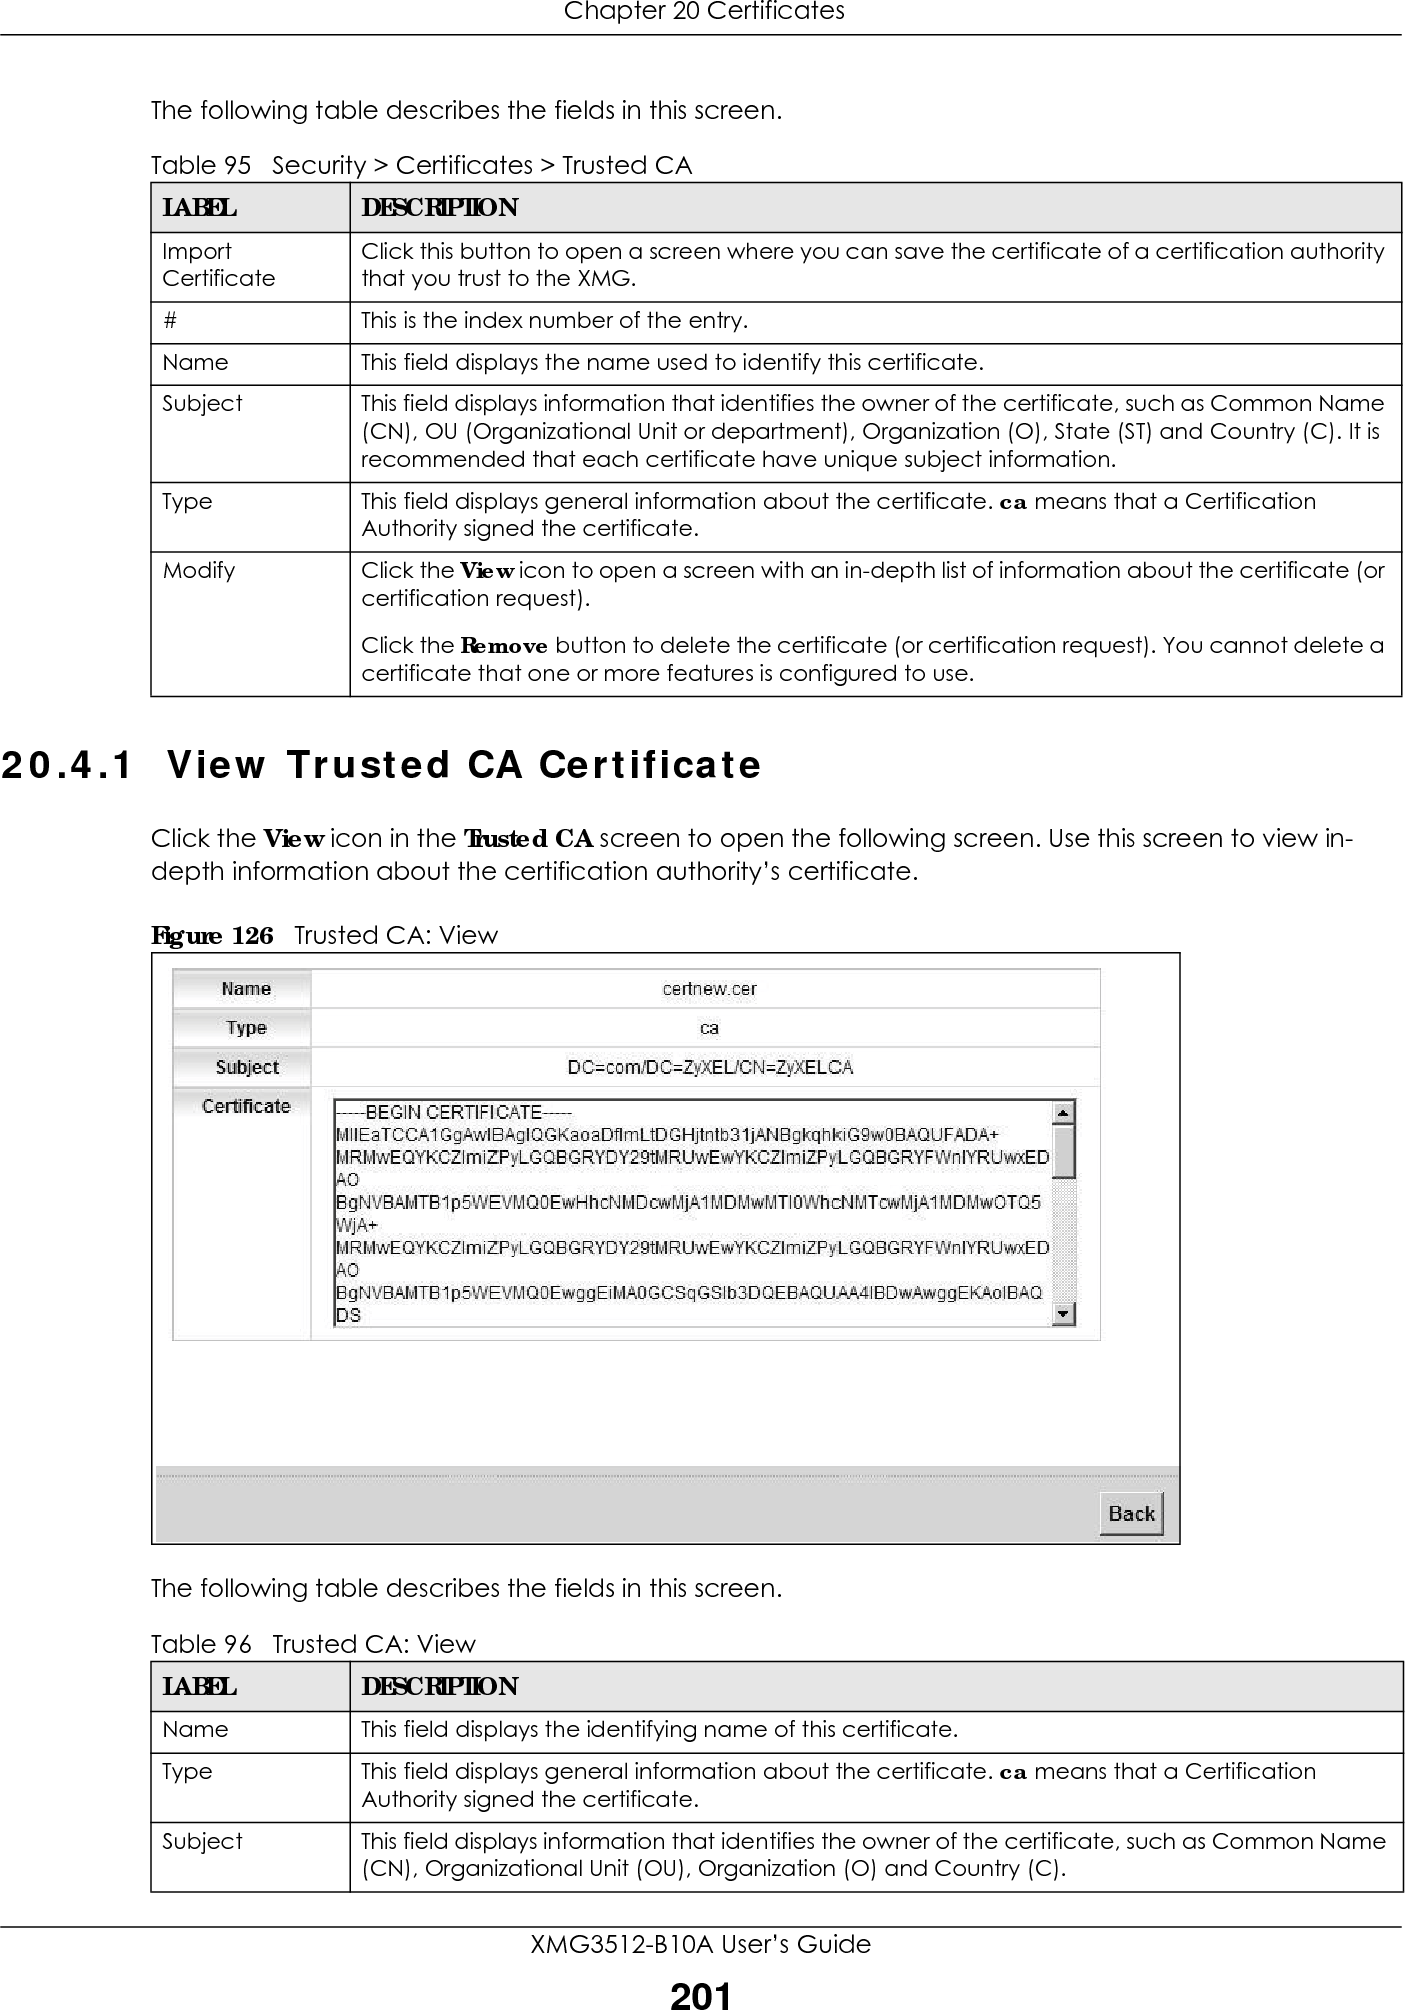  Chapter 20 CertificatesXMG3512-B10A User’s Guide201The following table describes the fields in this screen. 20.4.1  View Trusted CA CertificateClick the View icon in the Trusted CA screen to open the following screen. Use this screen to view in-depth information about the certification authority’s certificate.Figure 126   Trusted CA: View The following table describes the fields in this screen. Table 95   Security &gt; Certificates &gt; Trusted CALABEL DESCRIPTIONImport CertificateClick this button to open a screen where you can save the certificate of a certification authority that you trust to the XMG.# This is the index number of the entry.Name This field displays the name used to identify this certificate. Subject This field displays information that identifies the owner of the certificate, such as Common Name (CN), OU (Organizational Unit or department), Organization (O), State (ST) and Country (C). It is recommended that each certificate have unique subject information.Type This field displays general information about the certificate. ca means that a Certification Authority signed the certificate. Modify Click the View icon to open a screen with an in-depth list of information about the certificate (or certification request).Click the Remove button to delete the certificate (or certification request). You cannot delete a certificate that one or more features is configured to use.Table 96   Trusted CA: ViewLABEL DESCRIPTIONName This field displays the identifying name of this certificate. Type This field displays general information about the certificate. ca means that a Certification Authority signed the certificate. Subject This field displays information that identifies the owner of the certificate, such as Common Name (CN), Organizational Unit (OU), Organization (O) and Country (C).